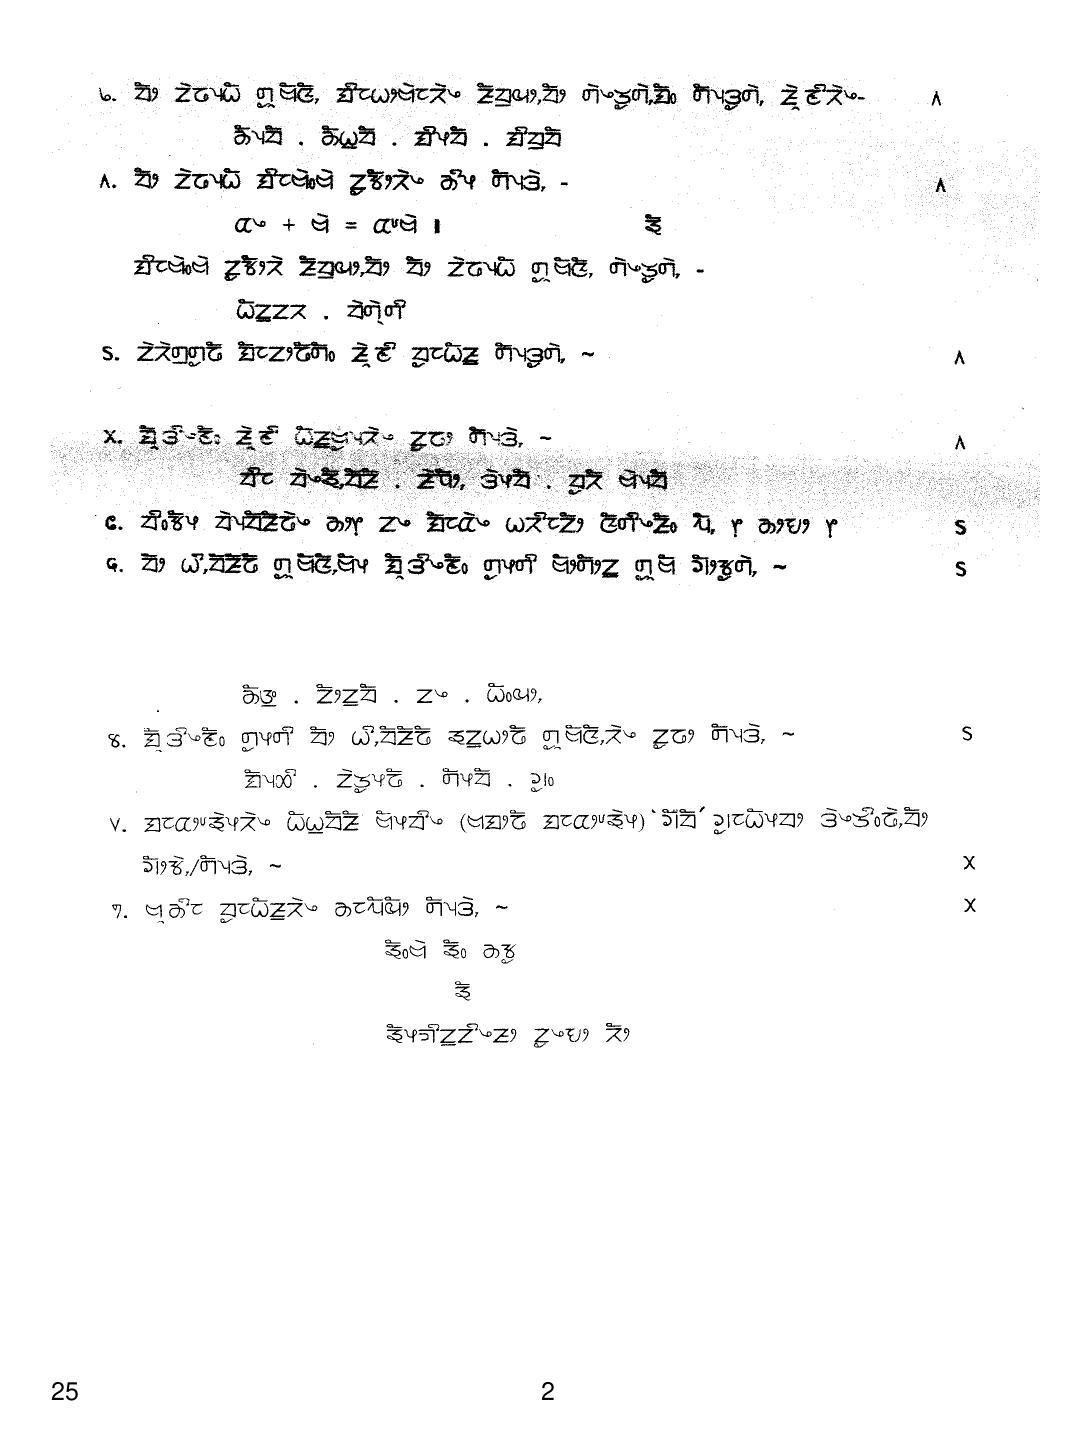 CBSE Class 12 25 Limboo 2019 Question Paper - Page 2